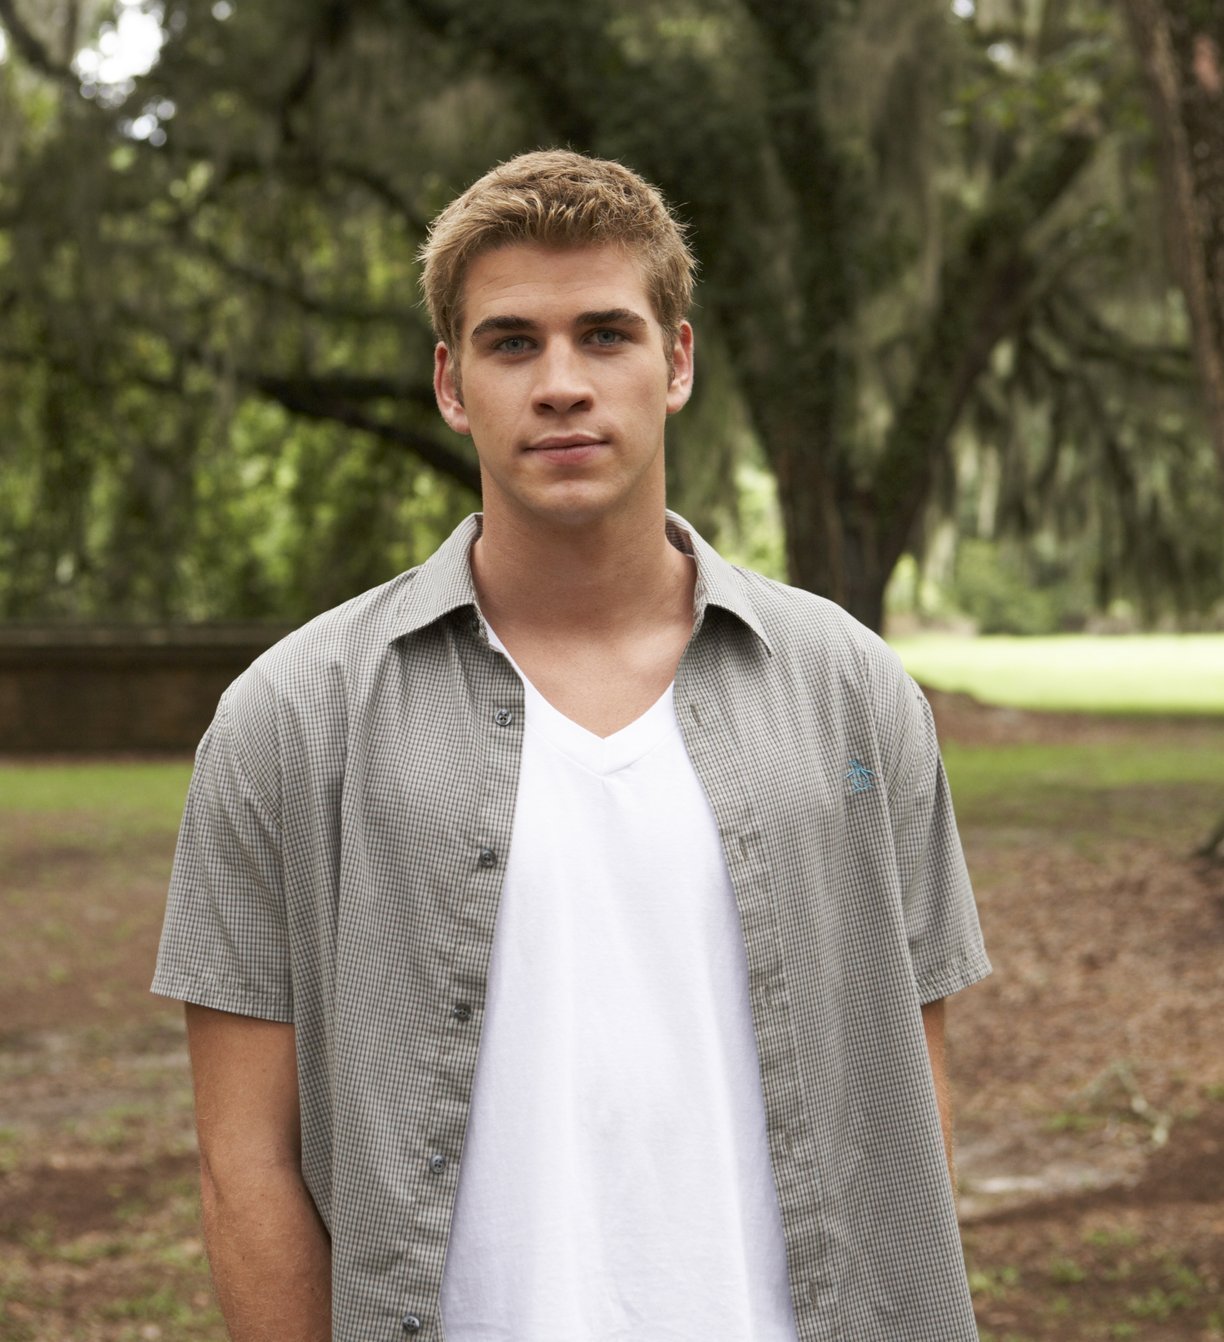 Liam Hemsworth in The Last Song (2010)